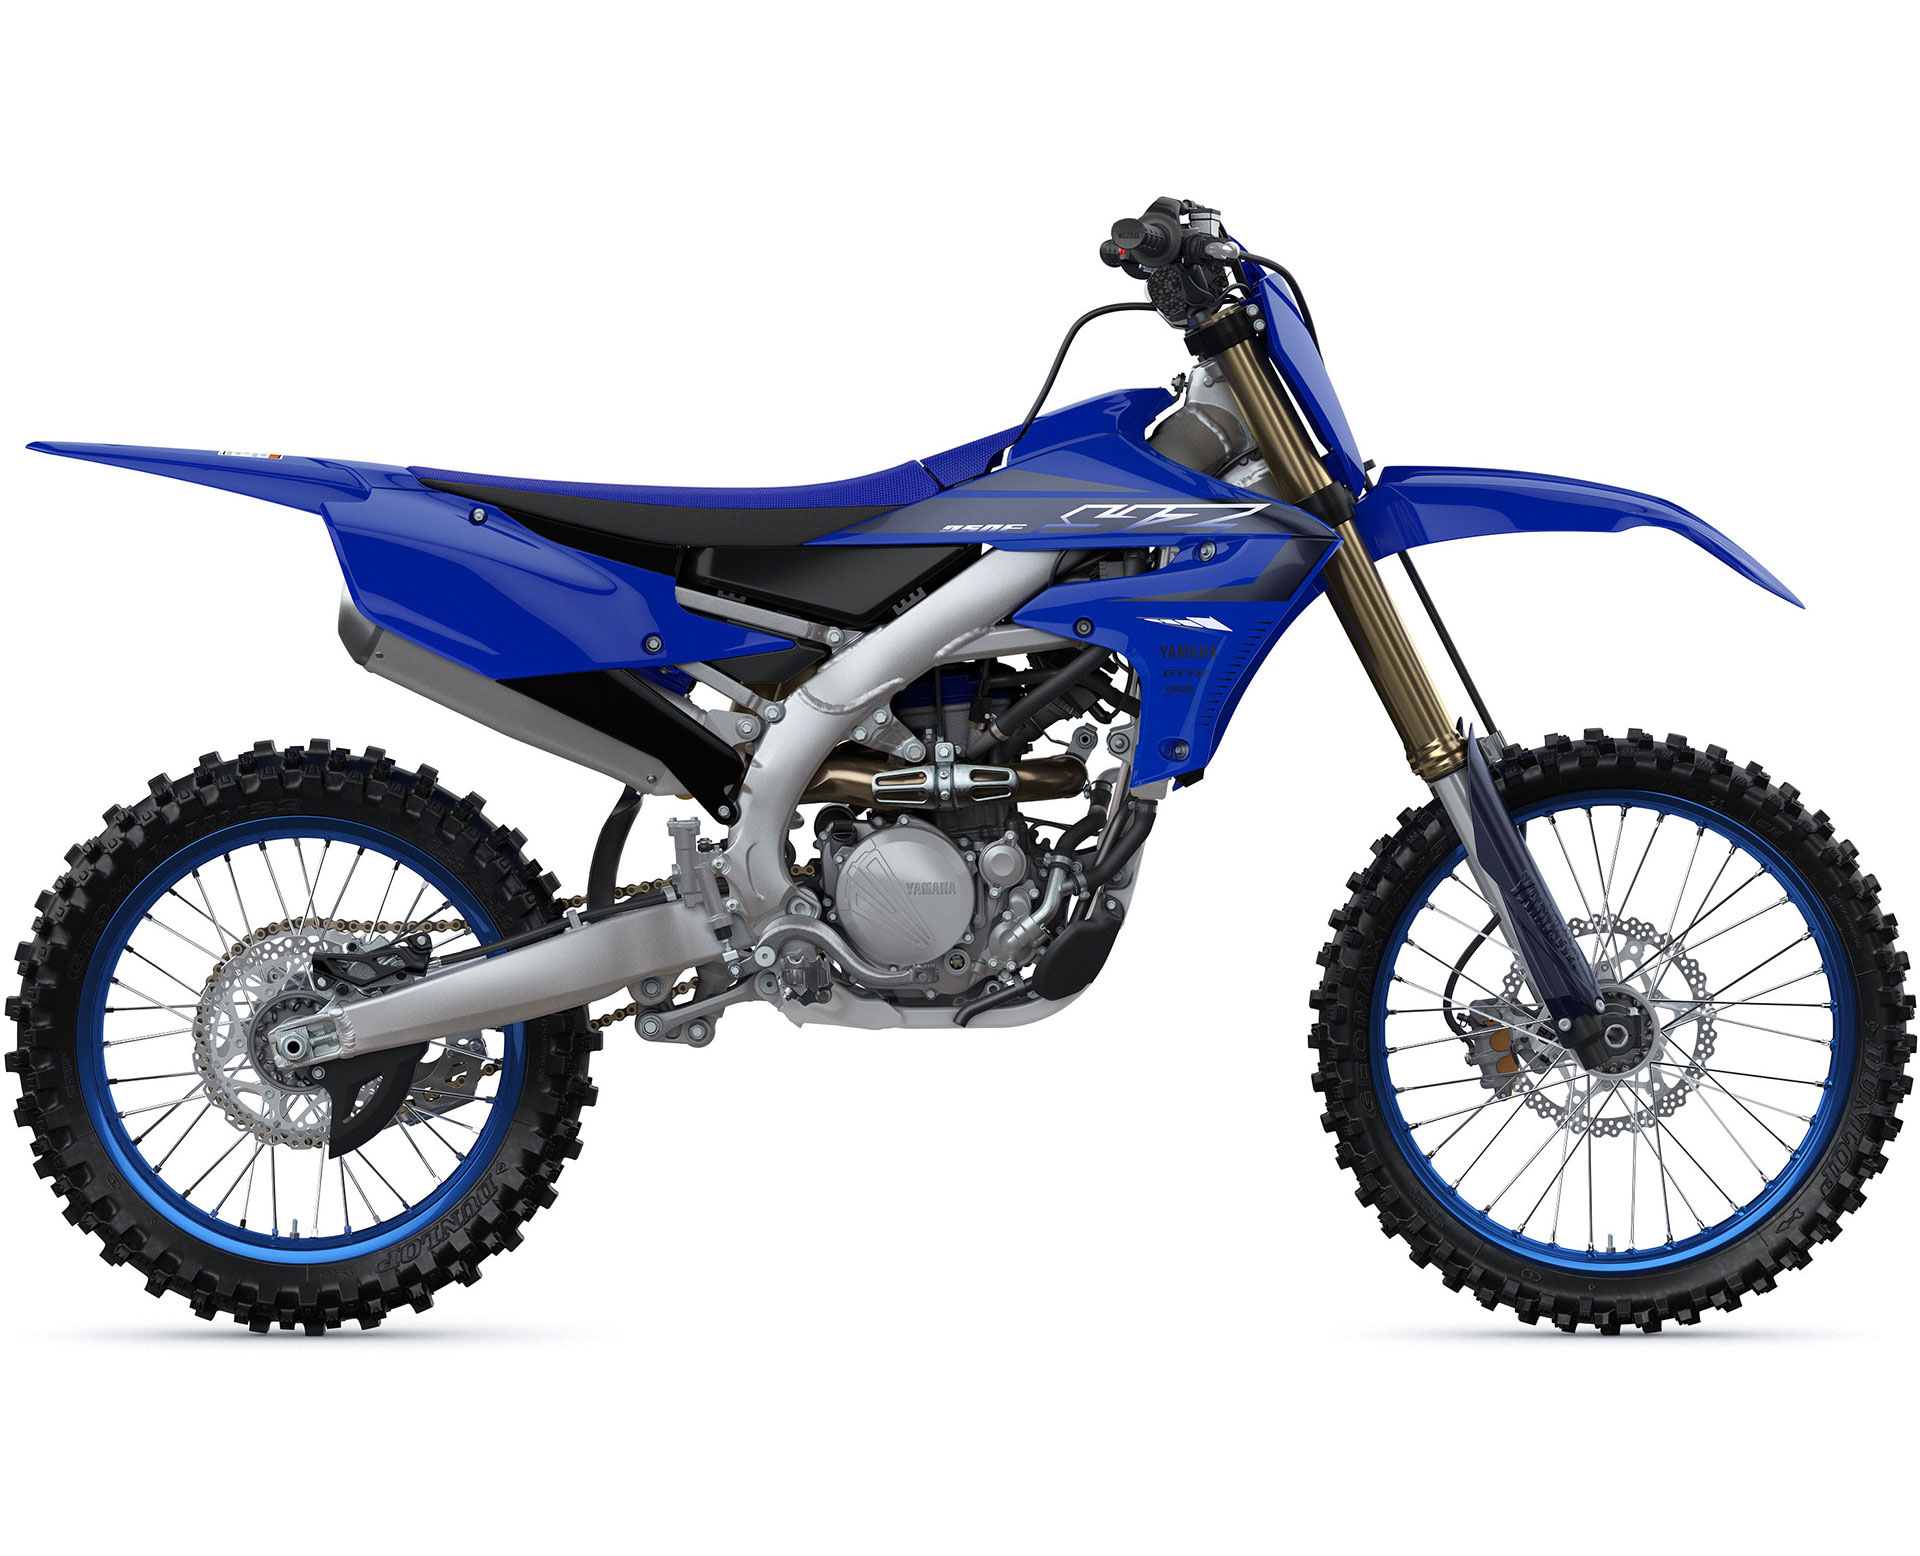 Thumbnail of your customized YZ250F 2023